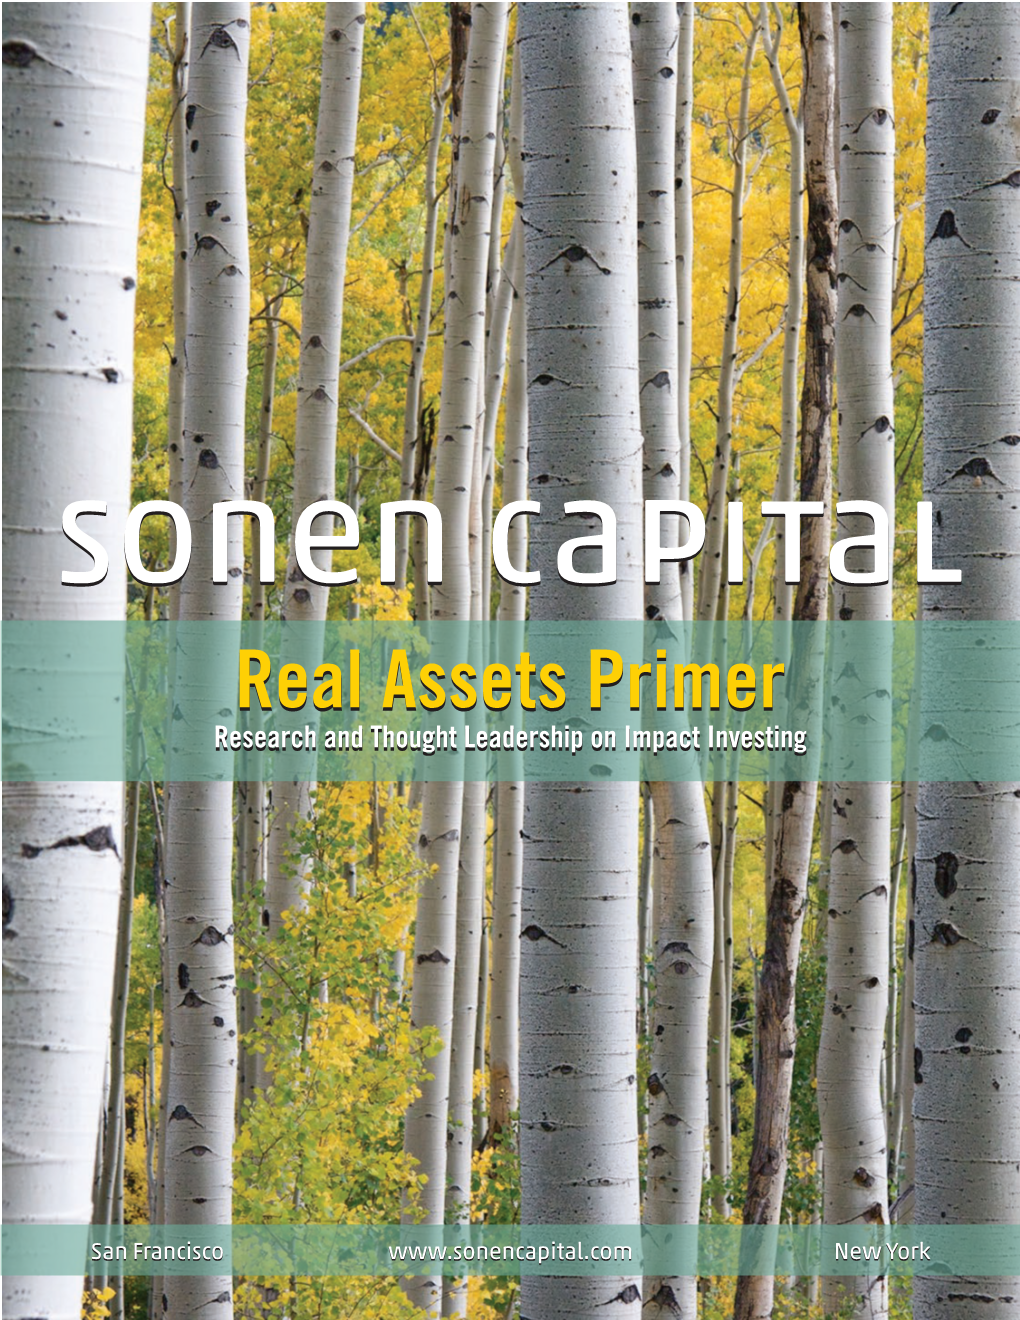 Real Assets Primer Research and Thought Leadership on Impact Investing